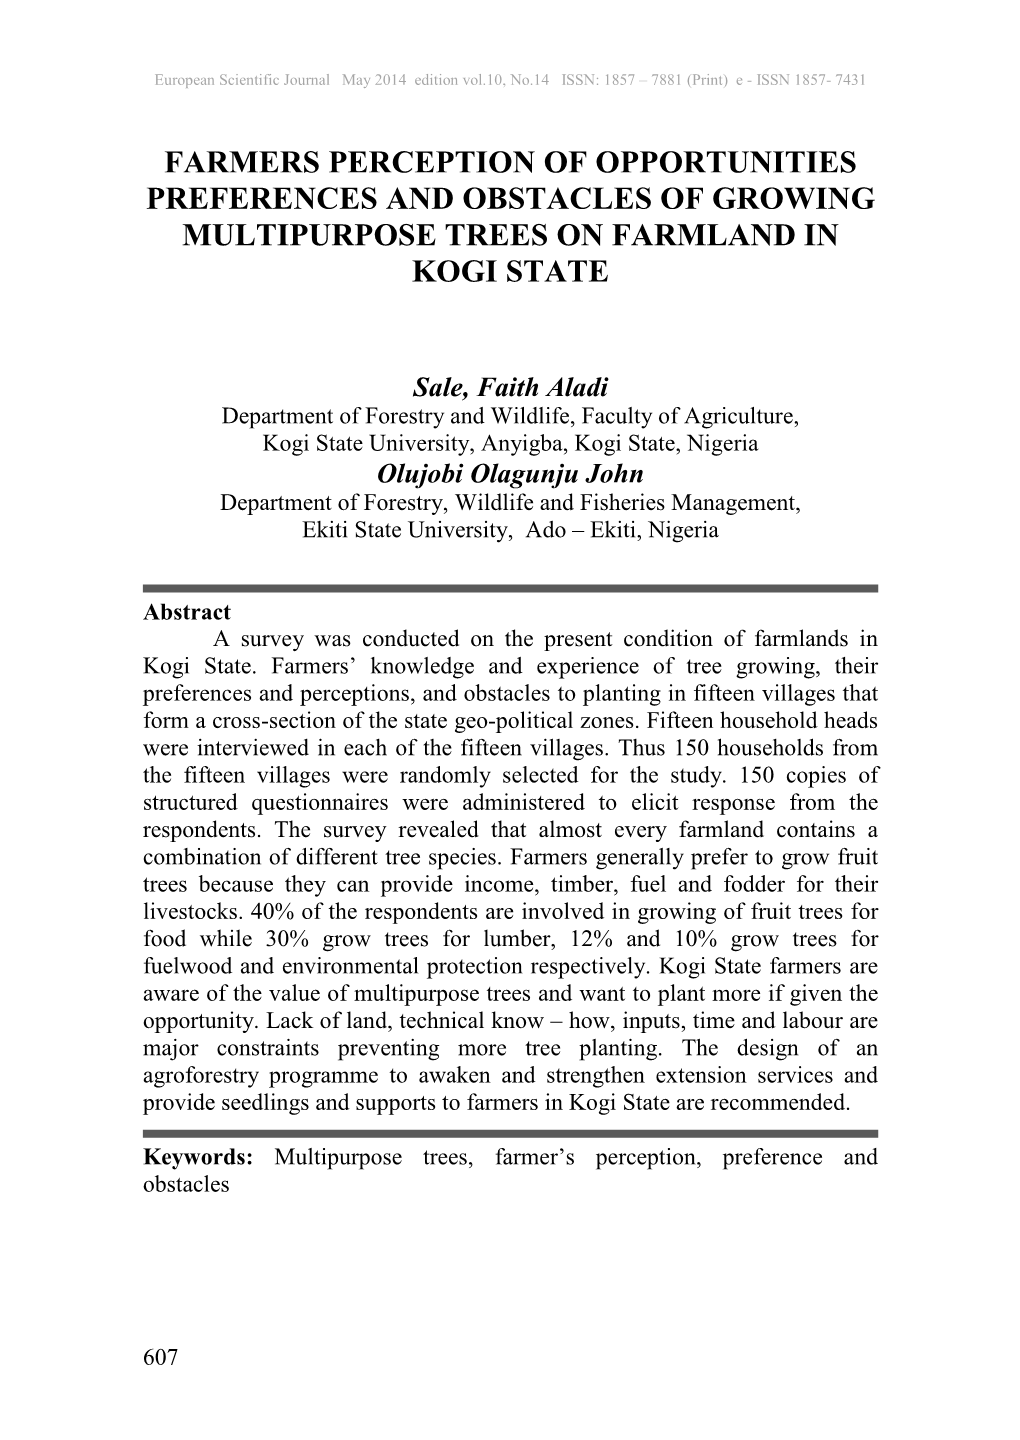 Farmers Perception of Opportunities Preferences and Obstacles of Growing Multipurpose Trees on Farmland in Kogi State